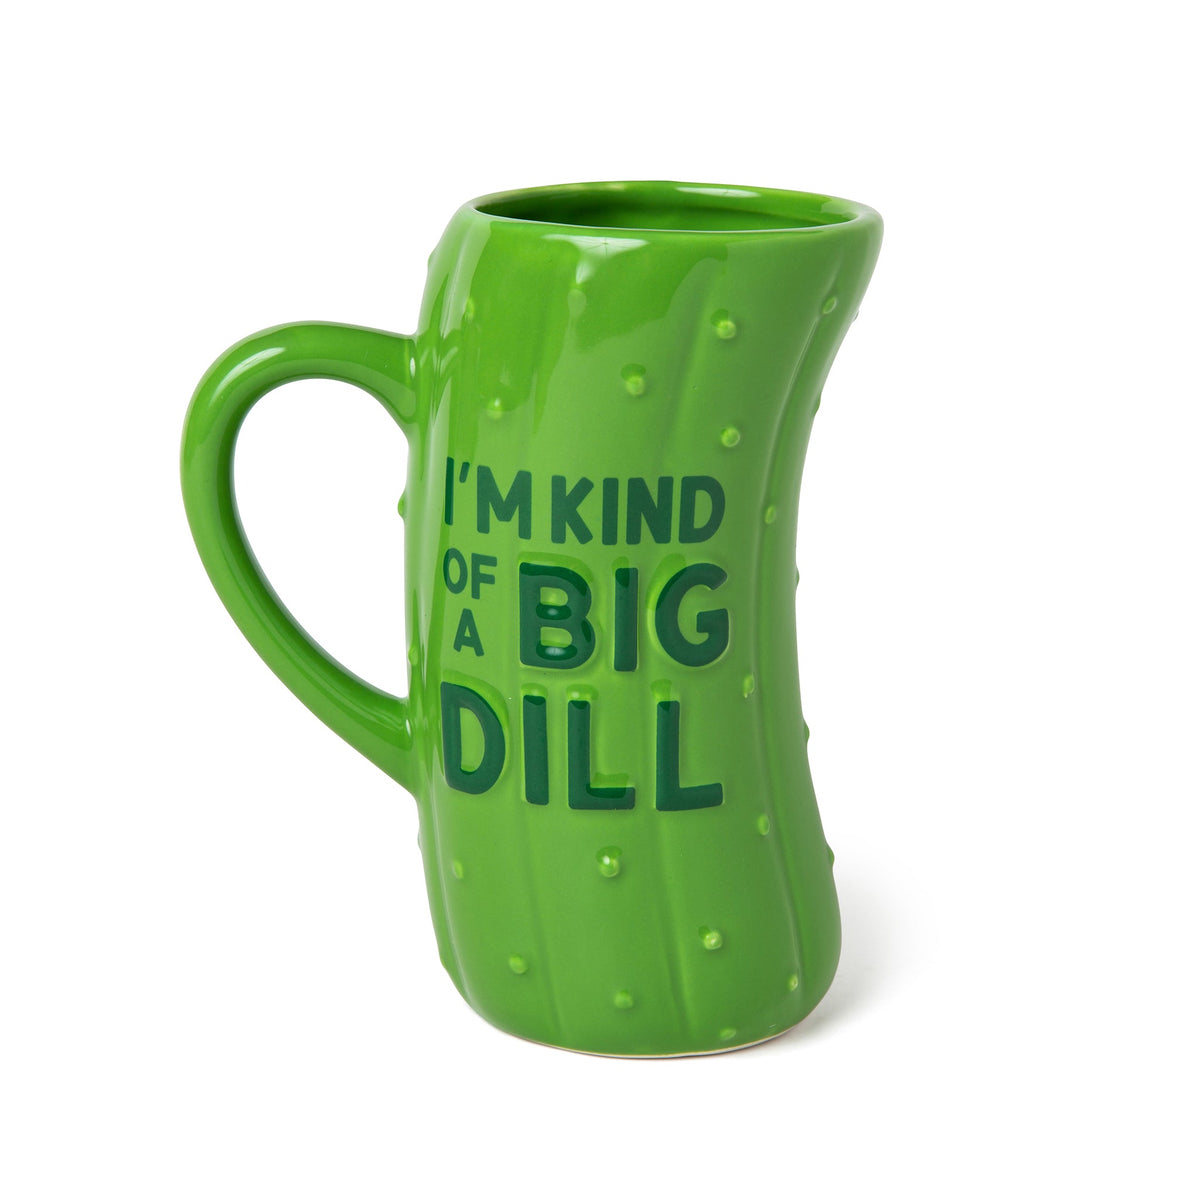 Bigmouth - I've Cut Back to Just One Cup XL Mug